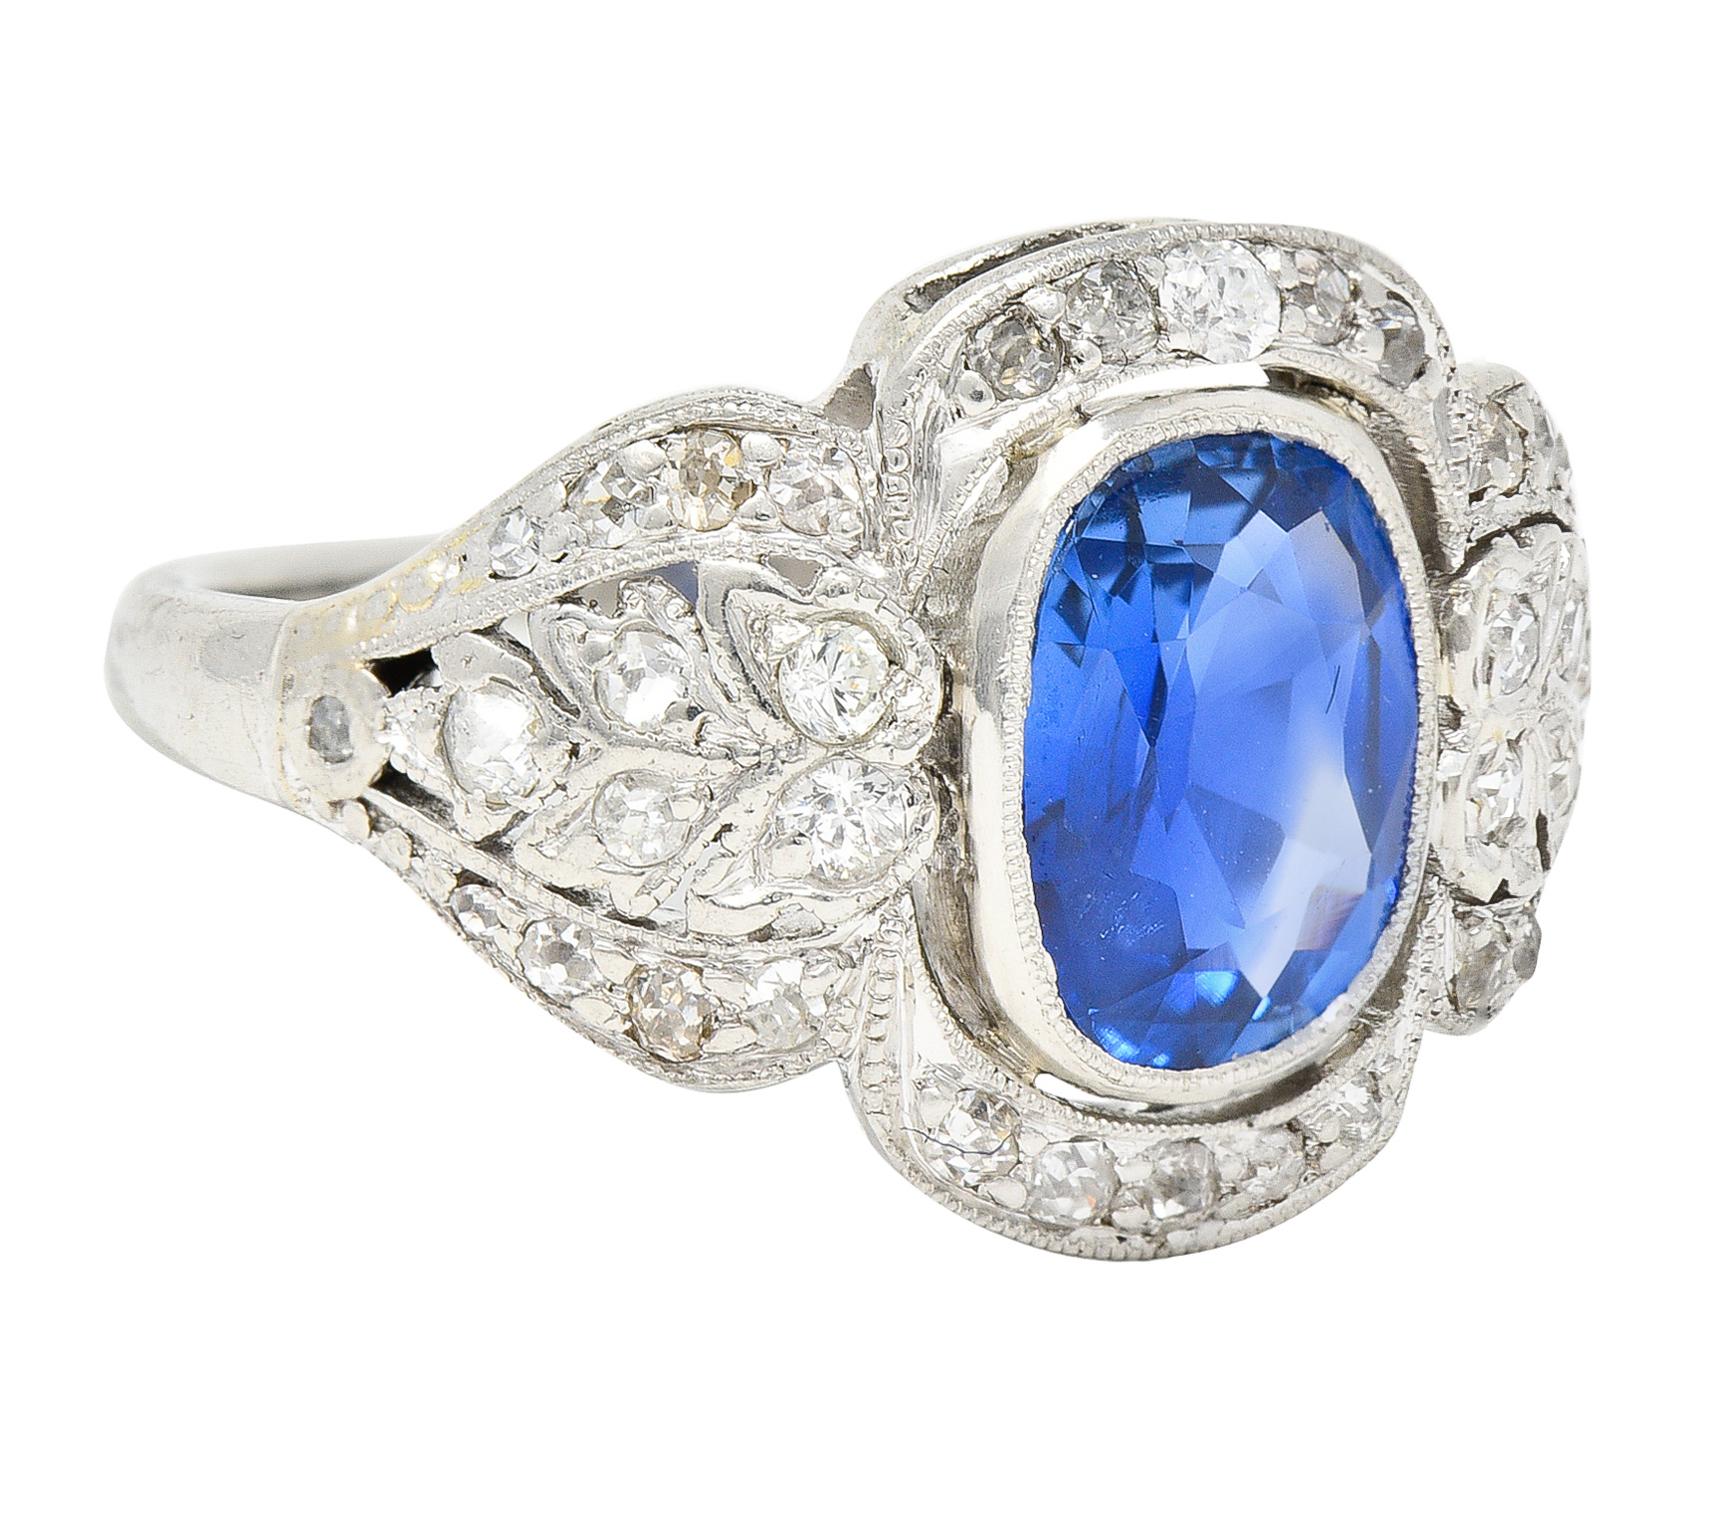 Centering a cushion cut sapphire weighing approximately 2.08 carats - transparent medium blue. Natural Burmese in origin with no indications of heat treatment - bezel set. Featuring a pierced foliate festoon motif surround. Bead and flush set with